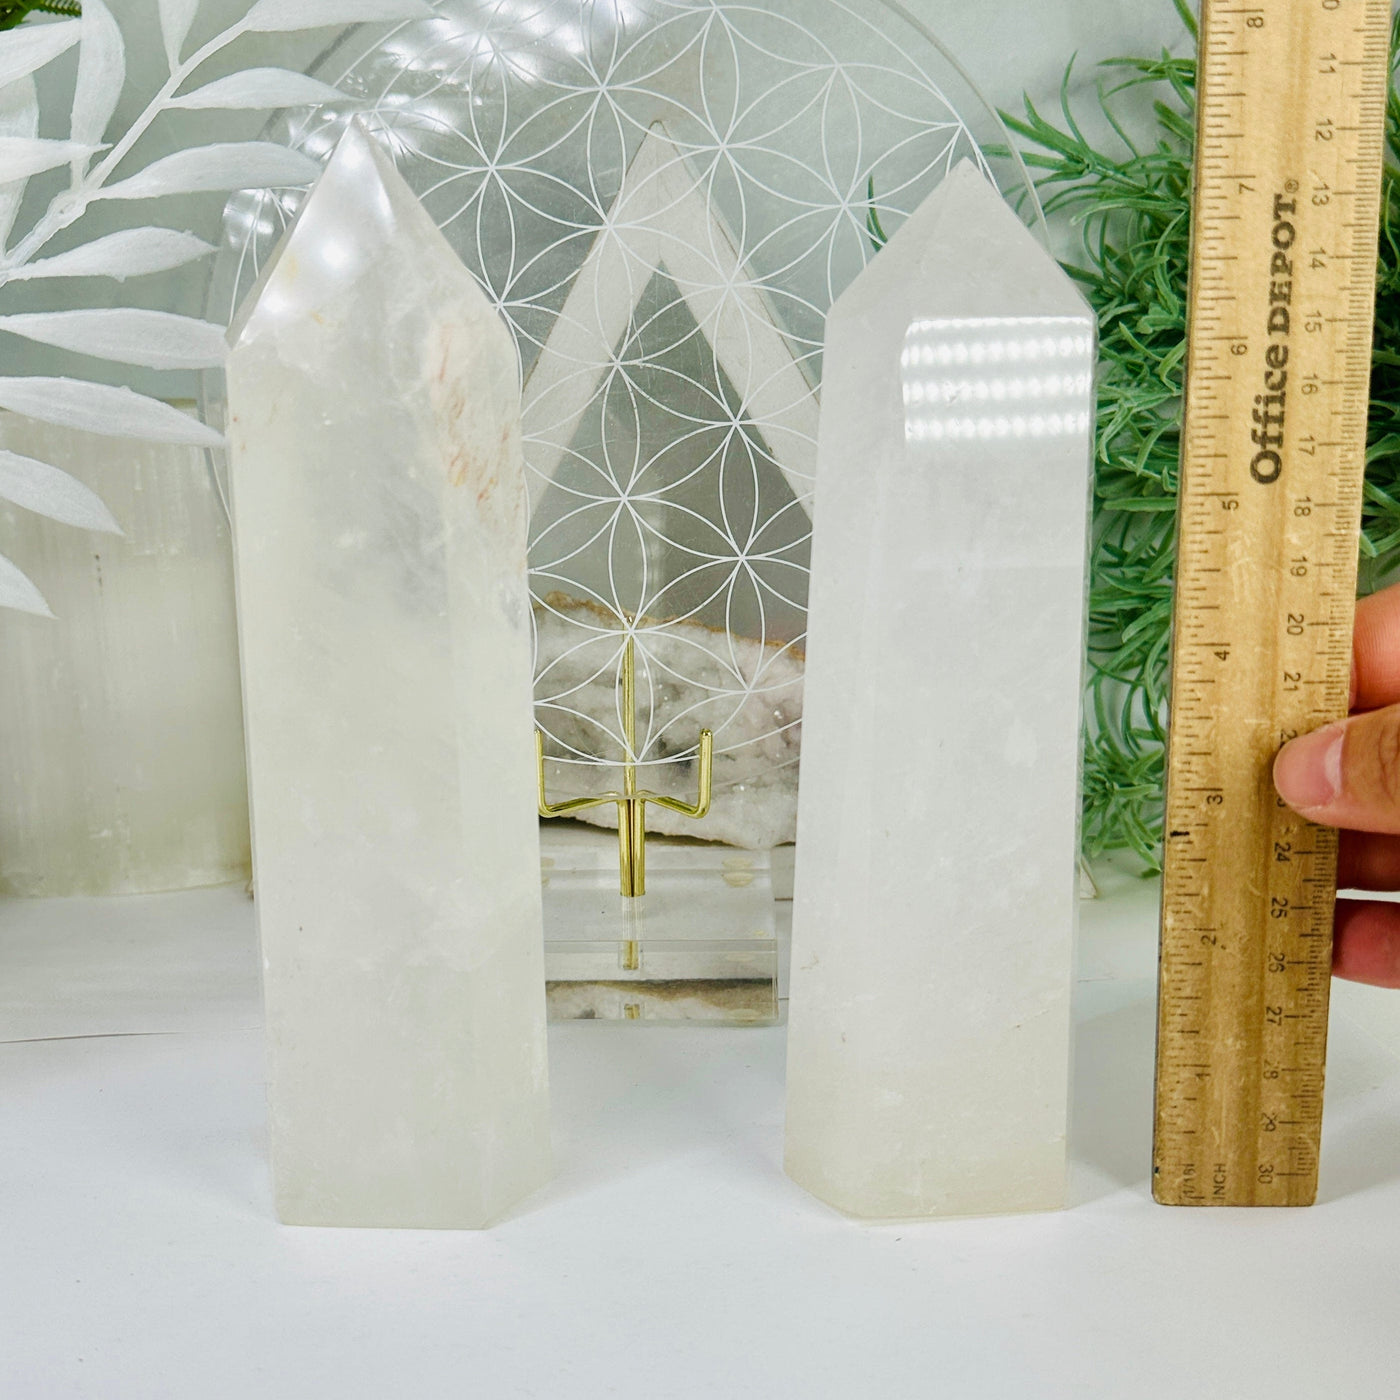  Crystal Quartz Tower - You Choose both towers with ruler and hand for size reference